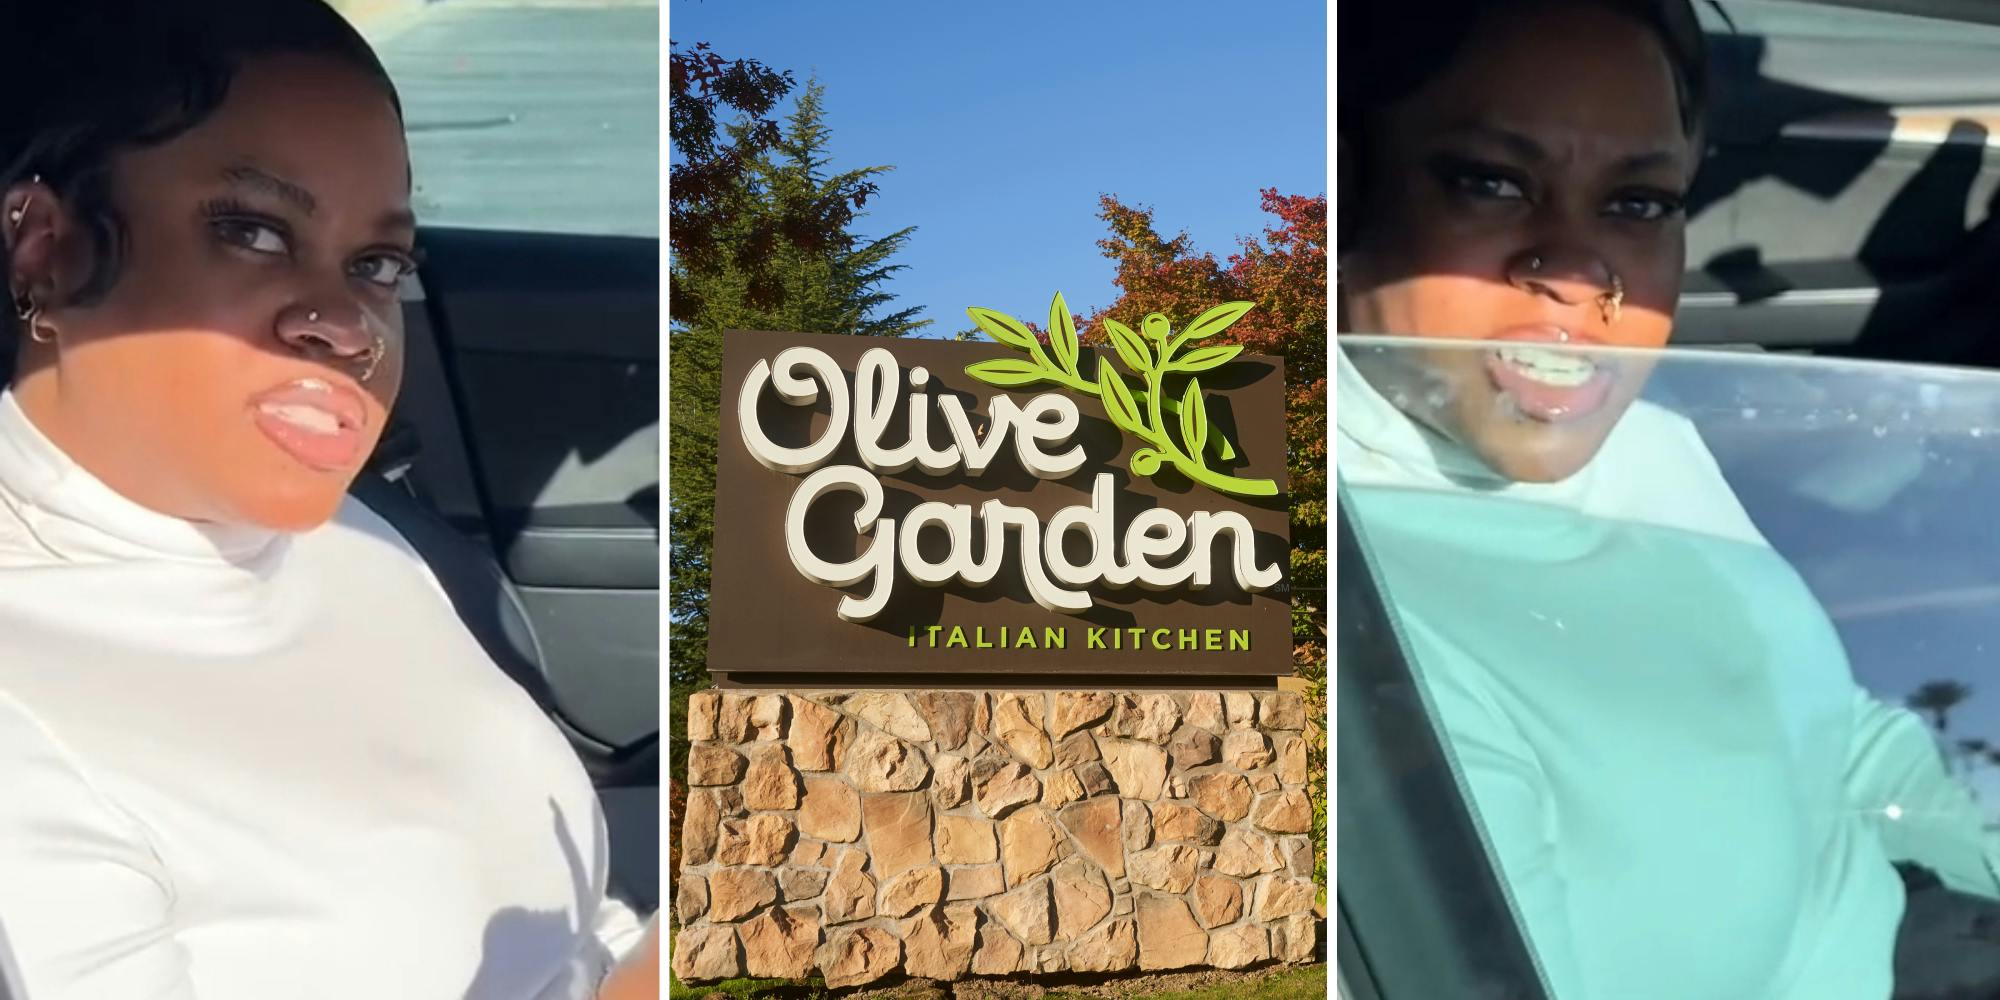 The first date takes the woman to the Olive Garden, and she won’t leave the car